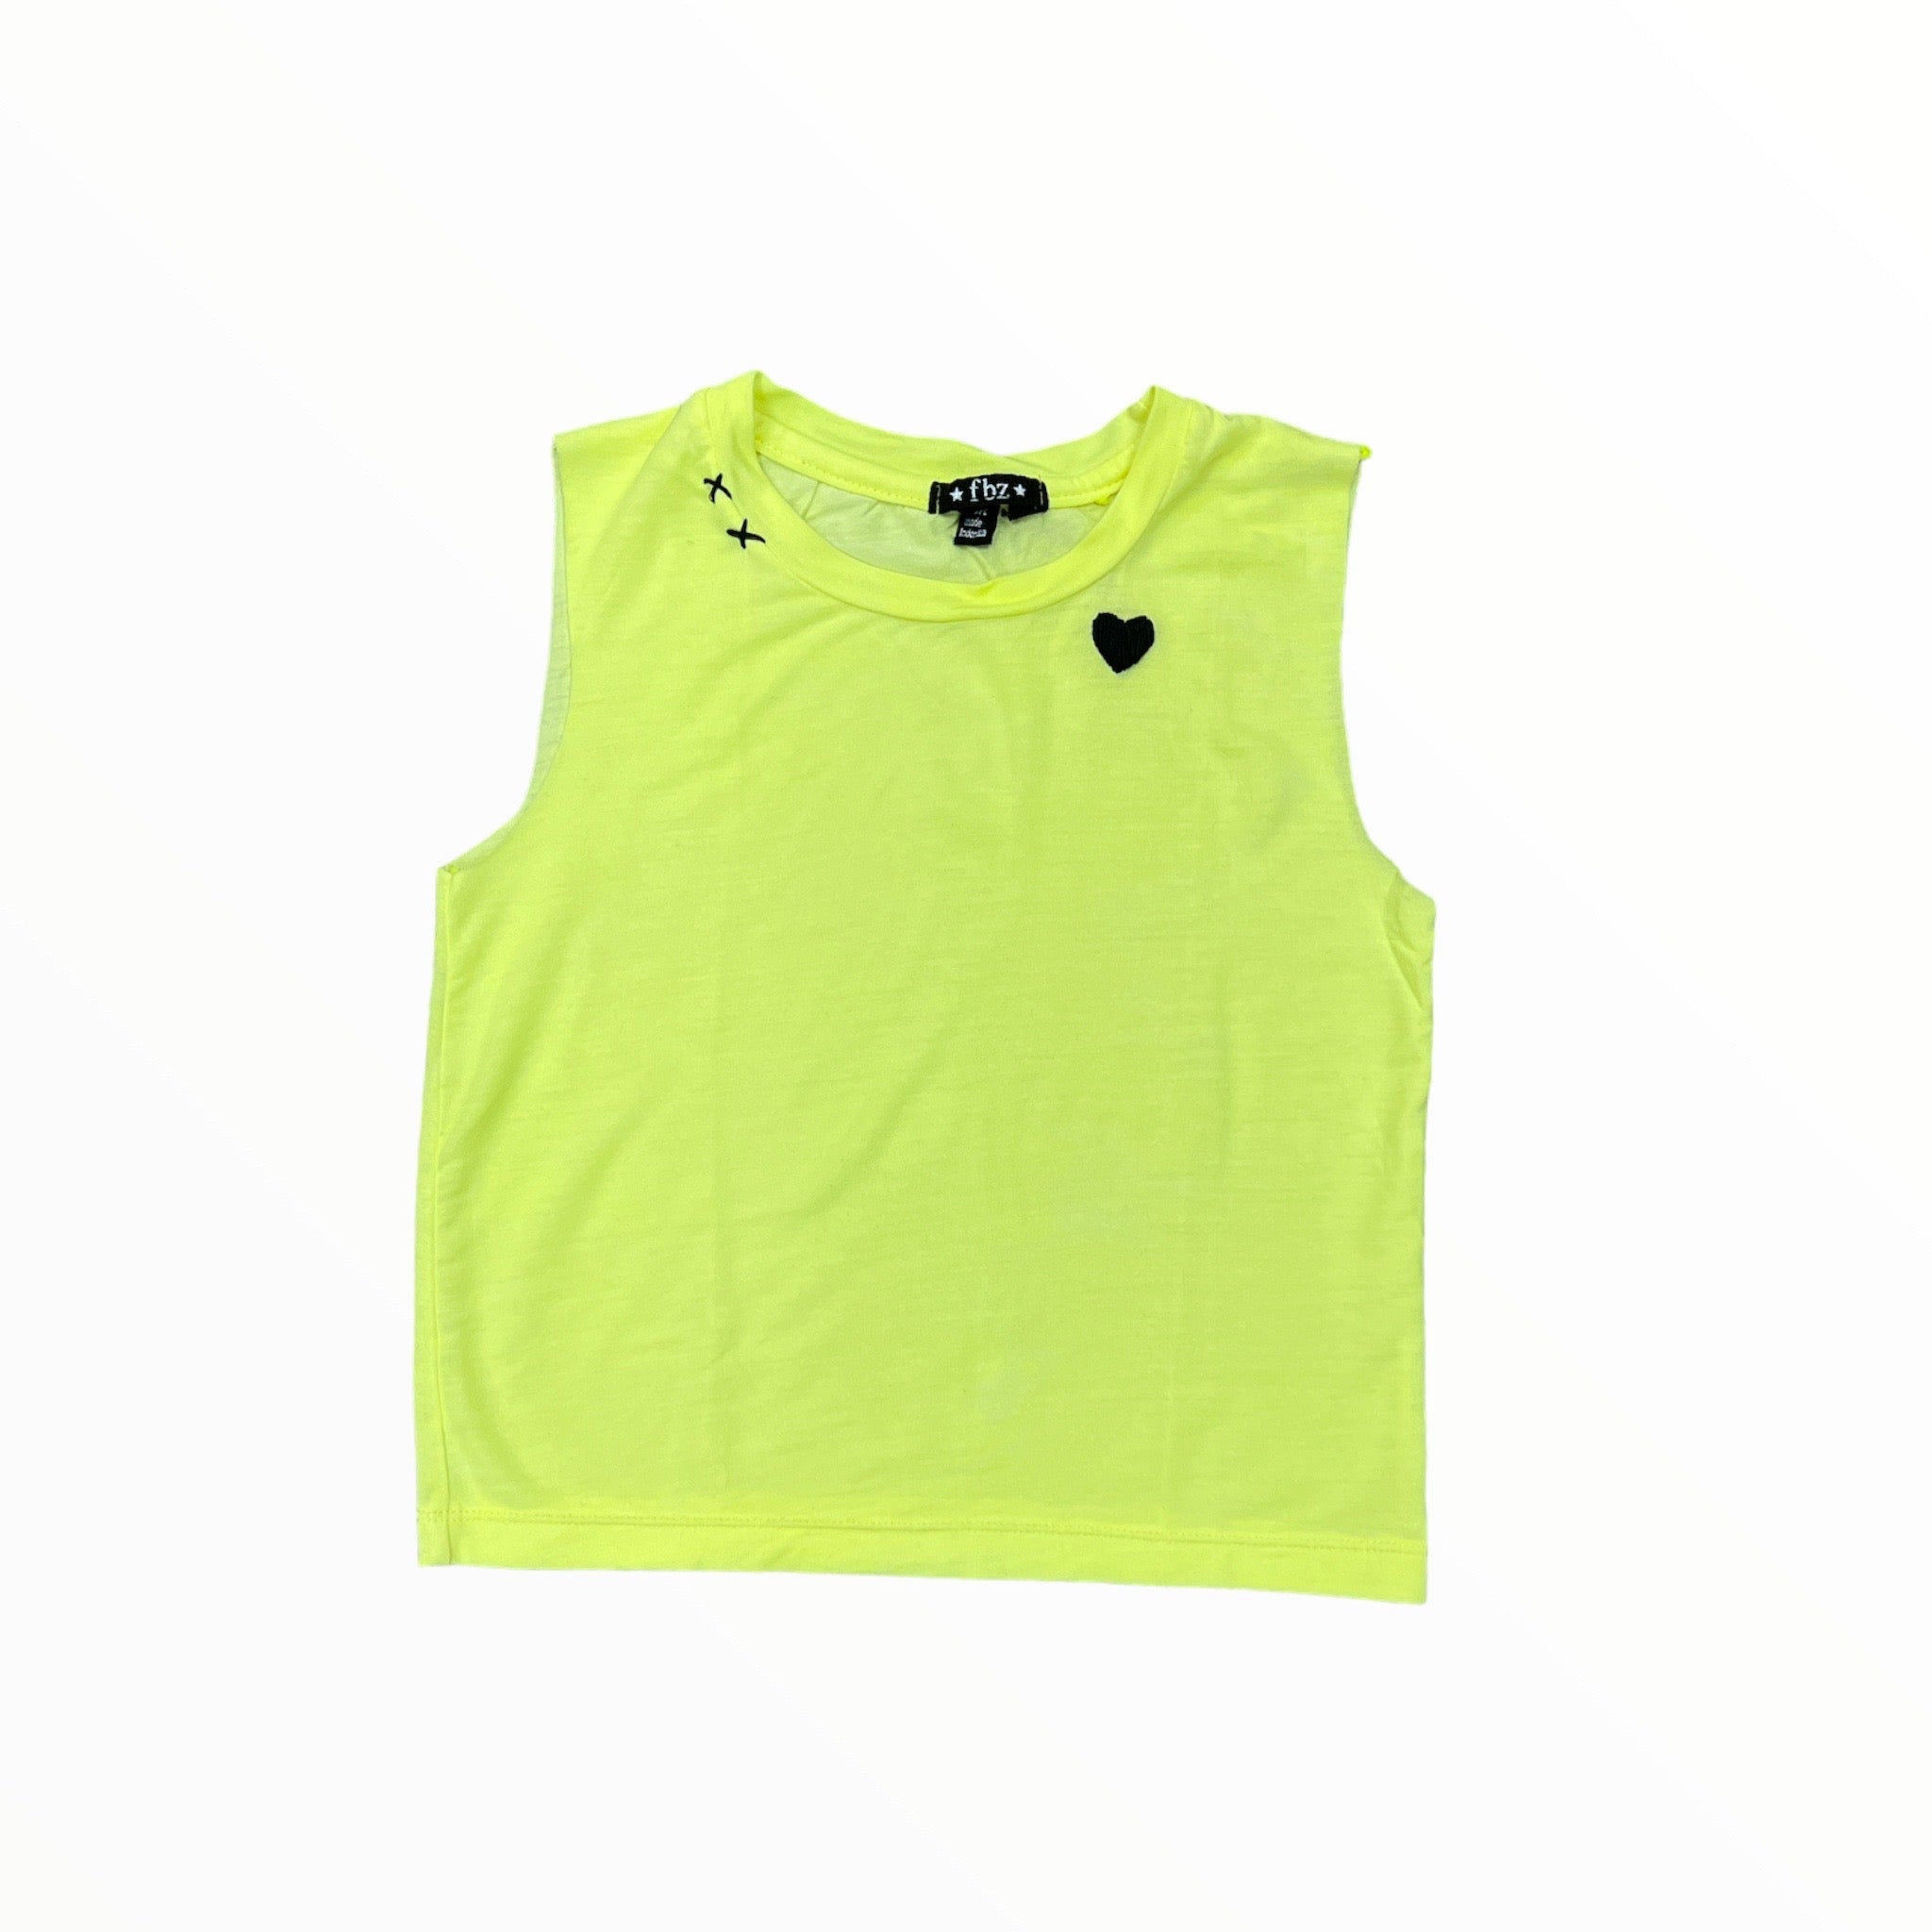 FLOWERS BY ZOE EMBROIDERED TANK - NEON YELLOW/BLK HEART